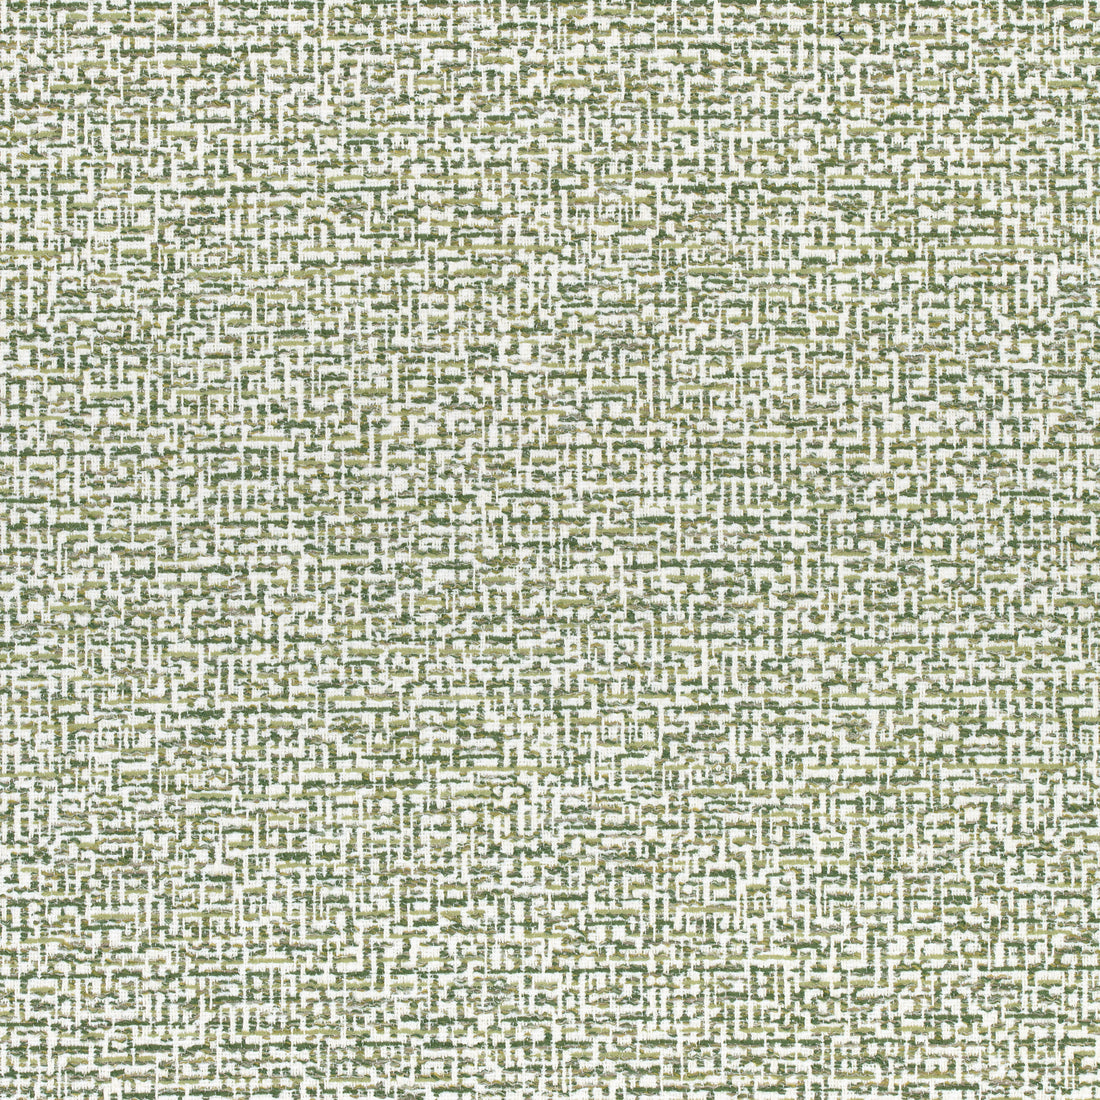 Mandela fabric in emerald color - pattern number W74052 - by Thibaut in the Cadence collection